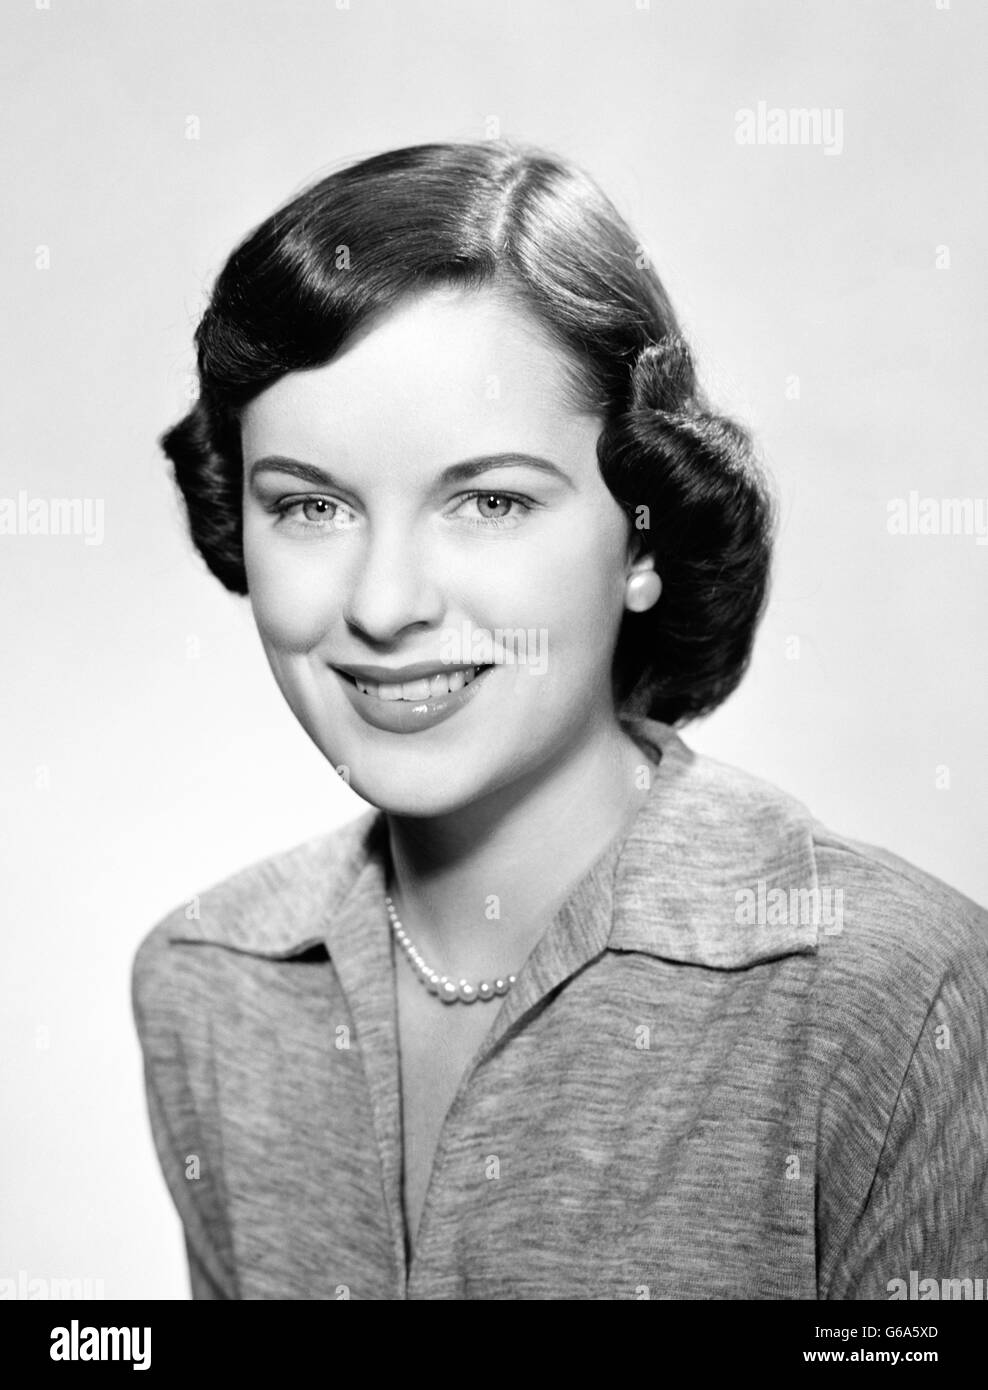 1950s Portrait Smiling Brunette Woman With Page Boy Hairstyle